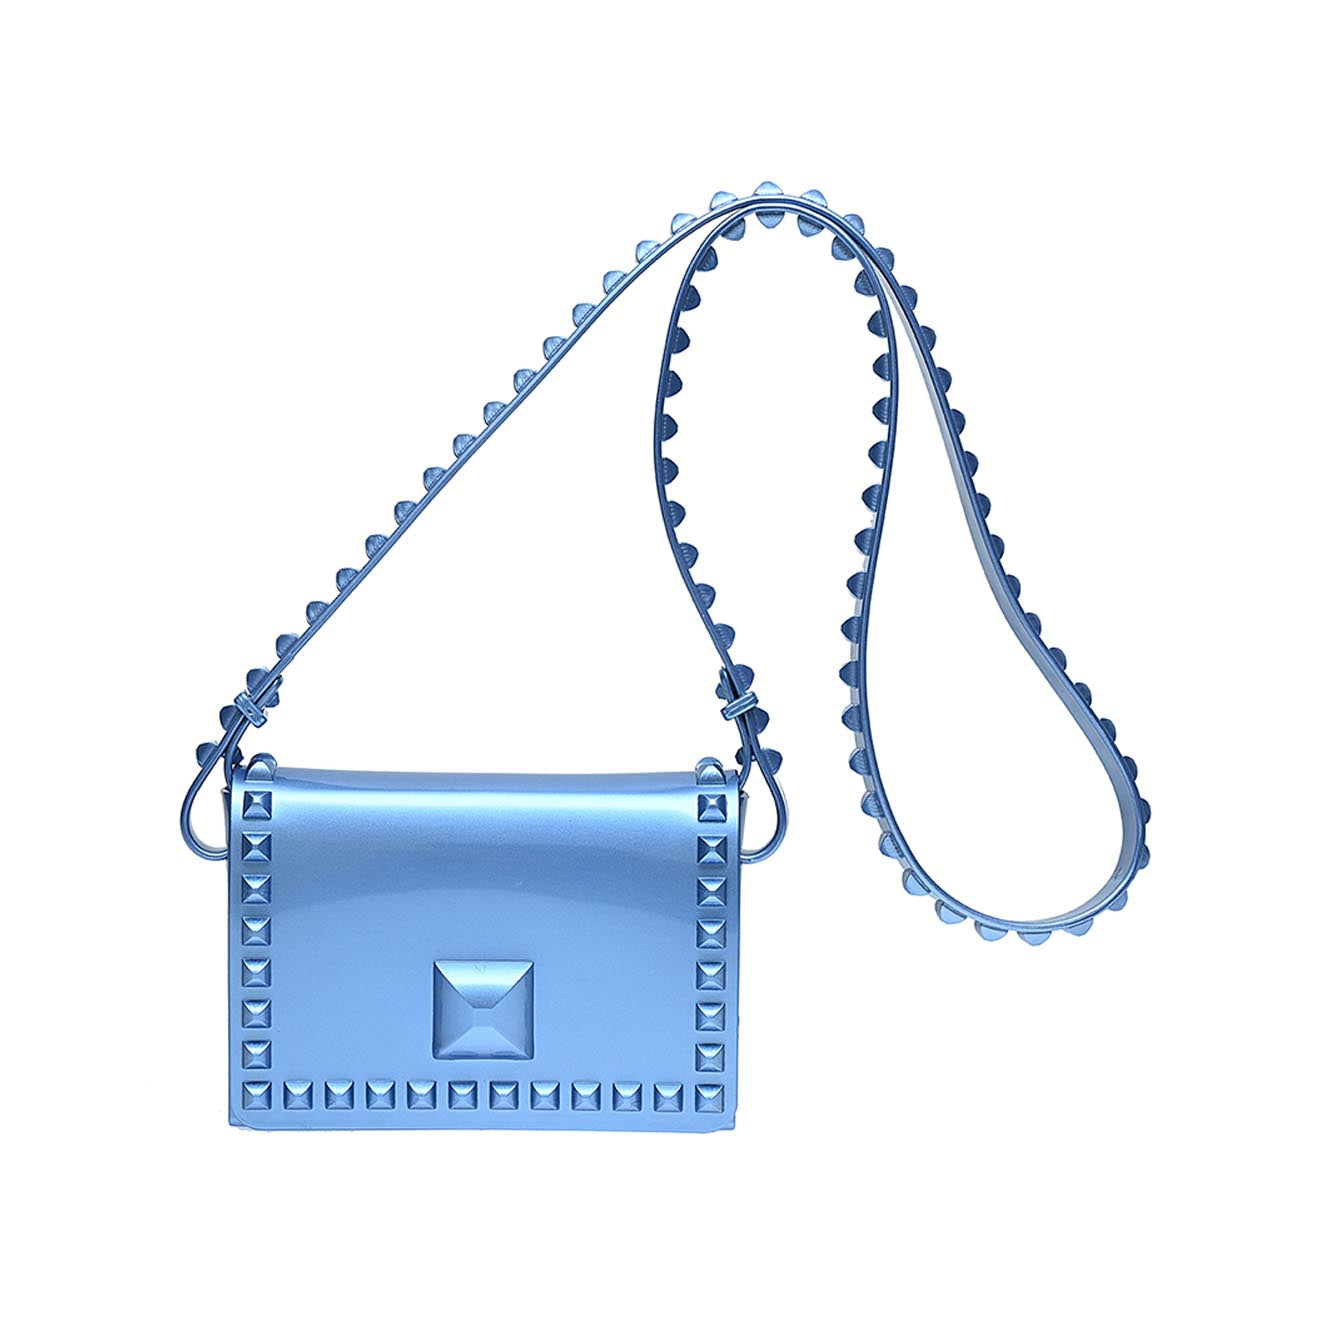 Mini crossbody bag for kids from Carmen Sol metallic blue in color made in Italy.